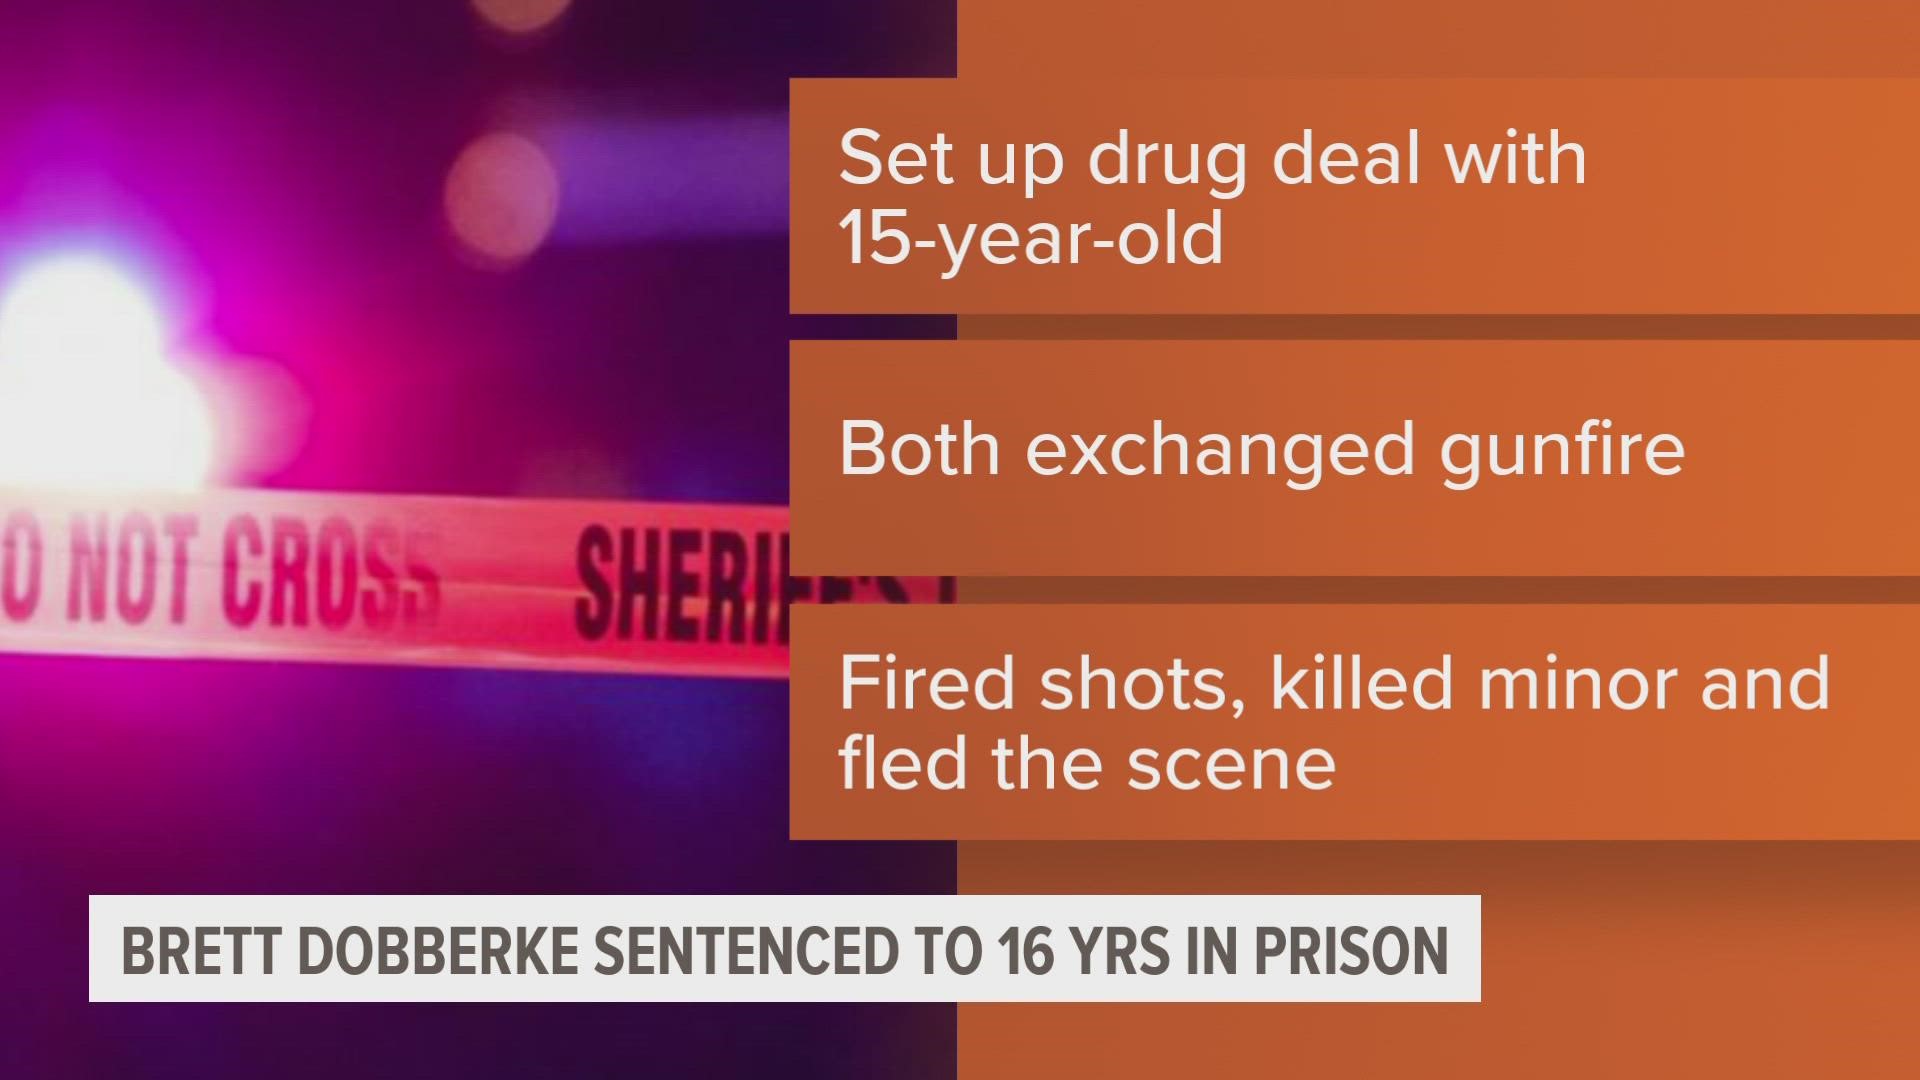 Police say two teens attempted to arrest Brett Dobberke when gunfire was exchanged and a teen was killed.